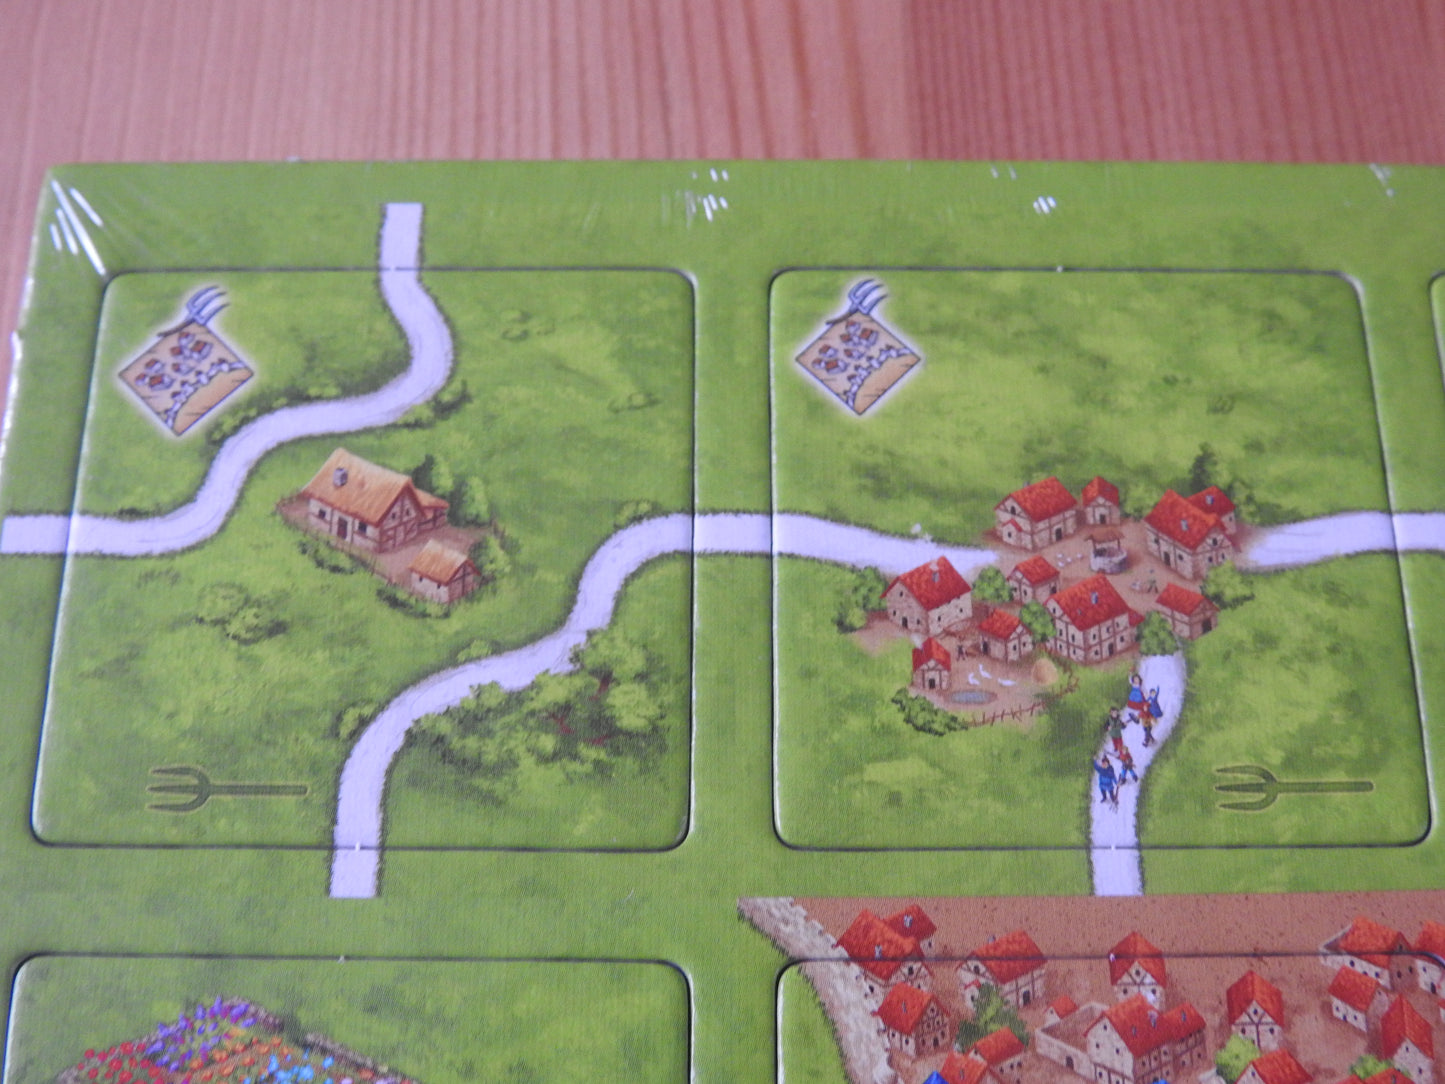 Close-up of 2 more tiles, showing roads, houses and an angry mob!